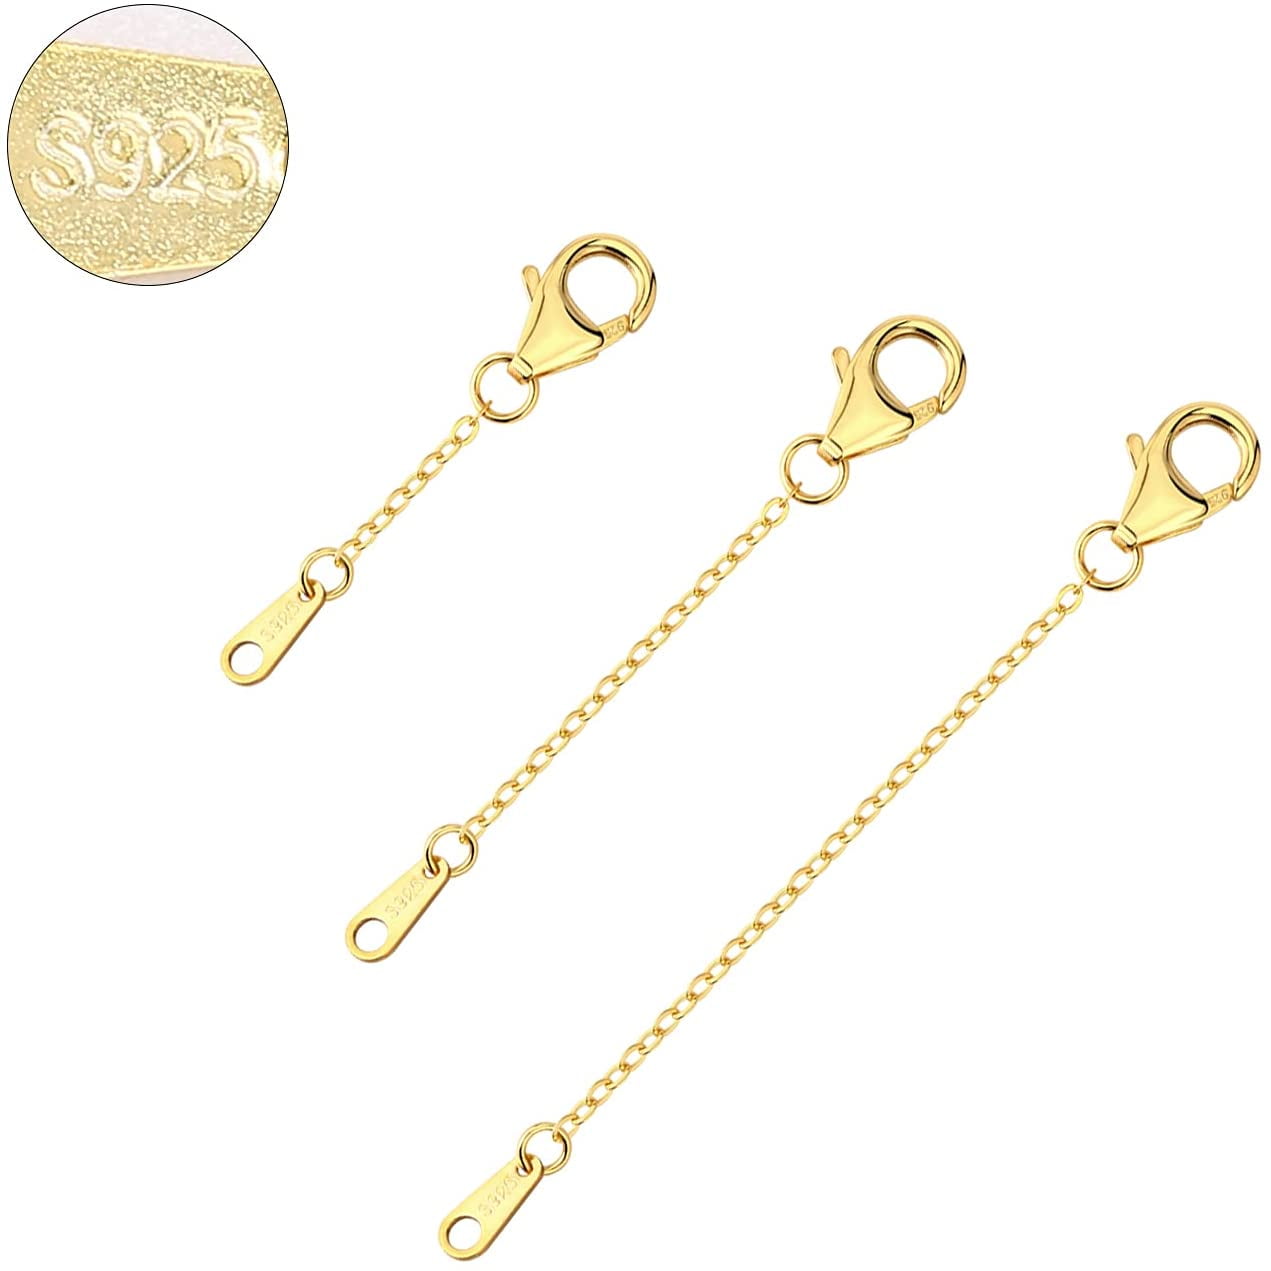 VANBARIS Gold Necklace Extenders 14K Gold Plated Extender Chain 925 Sterling Silver Extension Bracelet Extender Gold Chain Extenders for Necklaces 3